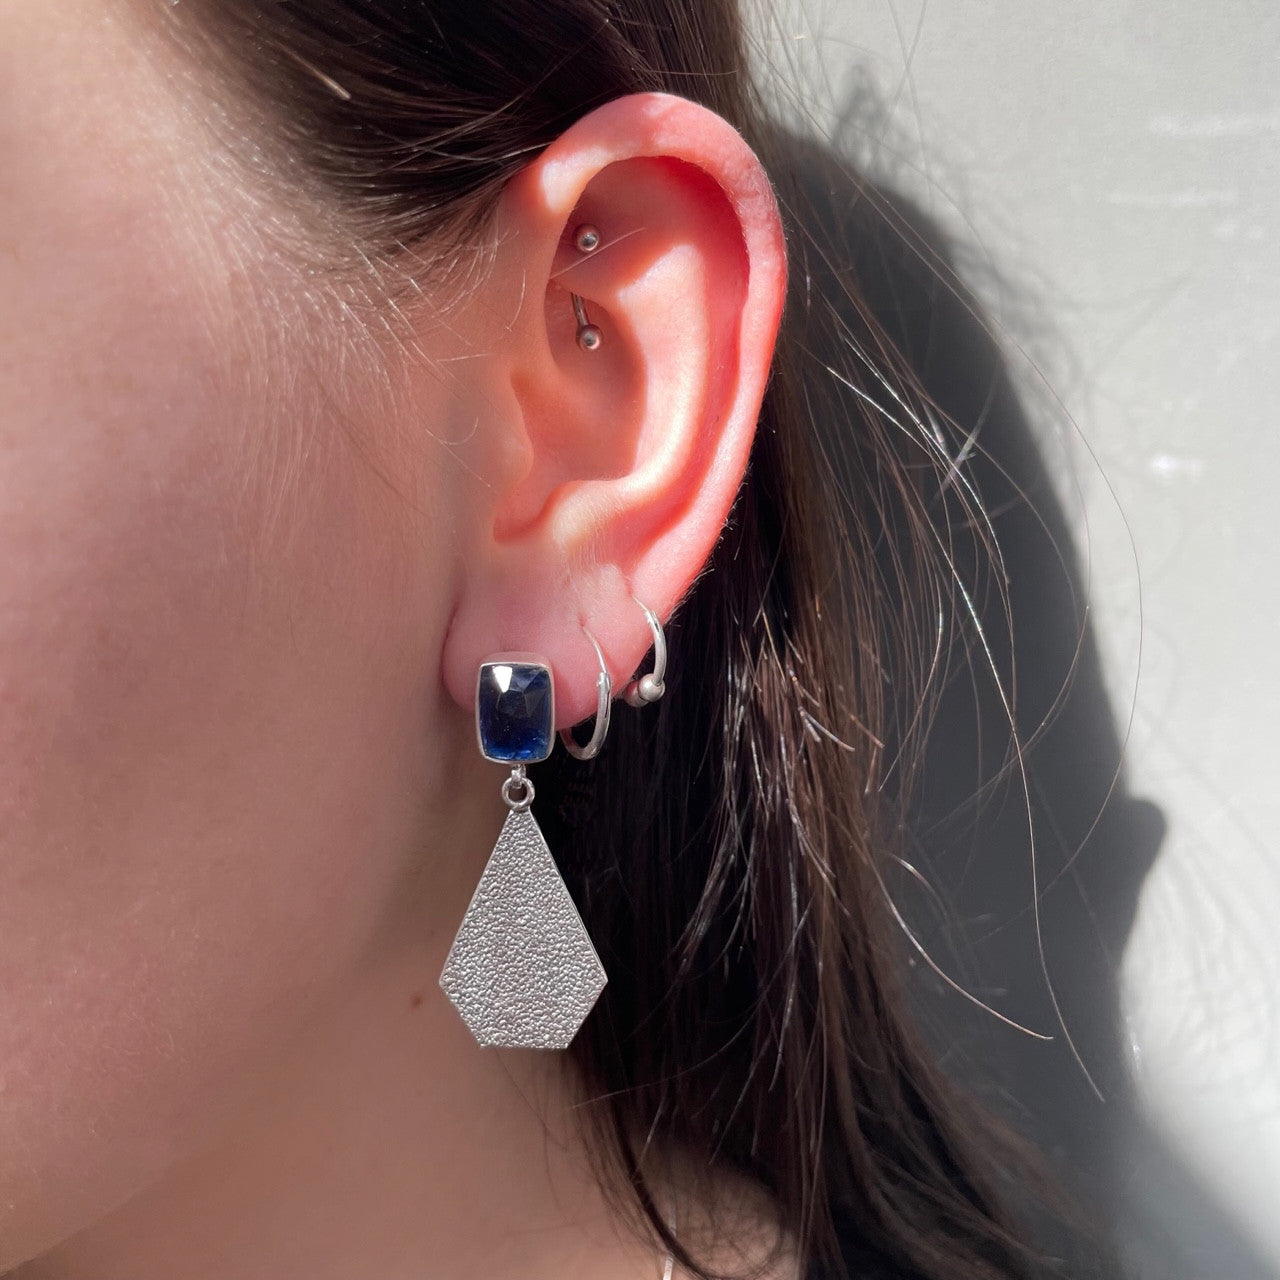 Young woman wearing kyanite and silver earrings.